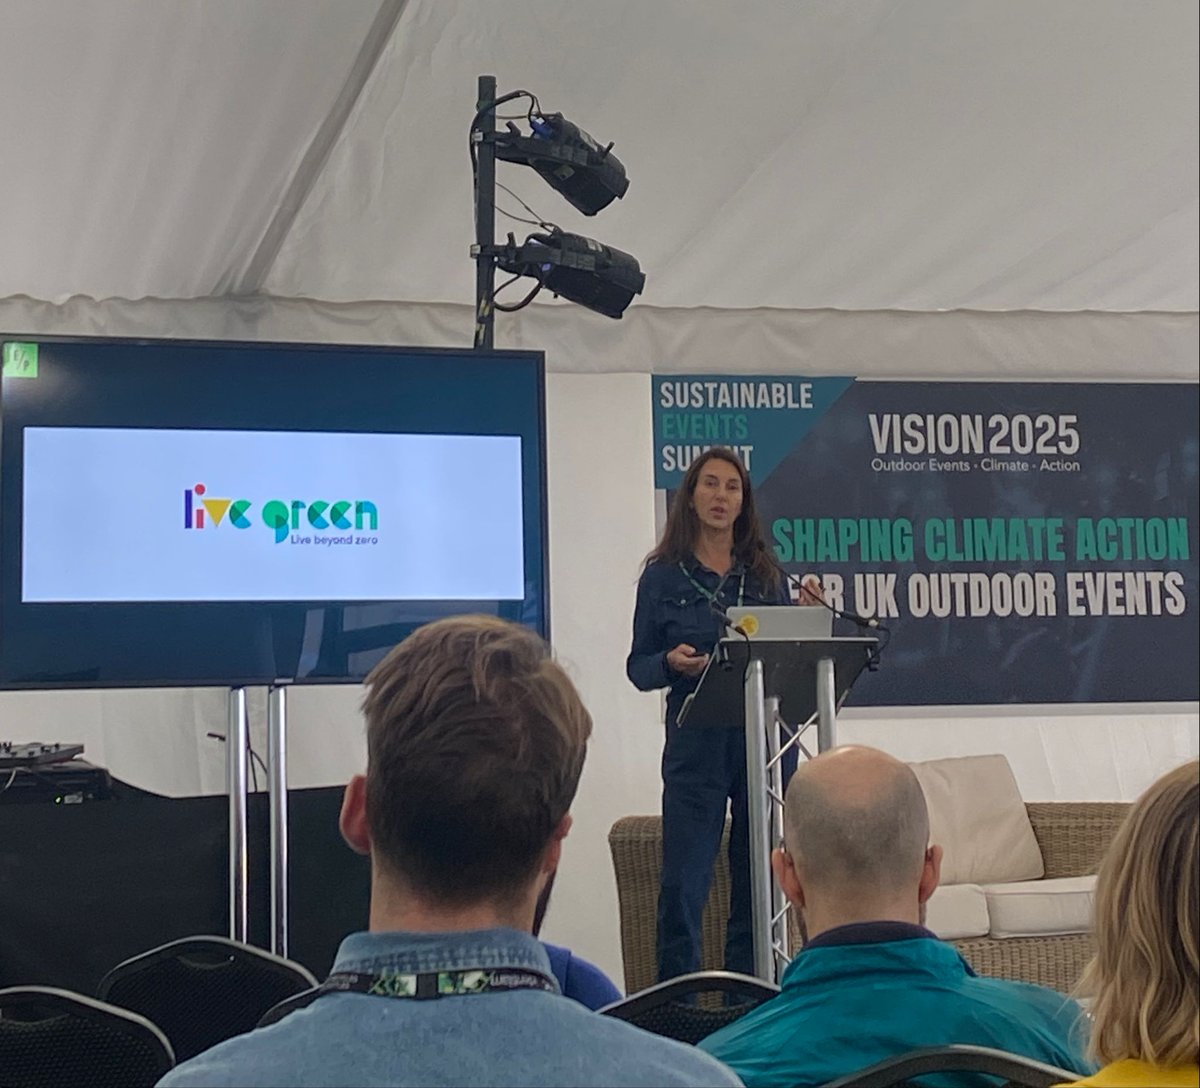 Great to see @CathyRunciman from @earthpercentorg discussing LIVE Green and giving a sneak preview to the  upcoming Reusable Cups research for venues! 🌱@JuliesBicycle @EventVision2025 #SustainableEventsSummit @TheShowmansShow